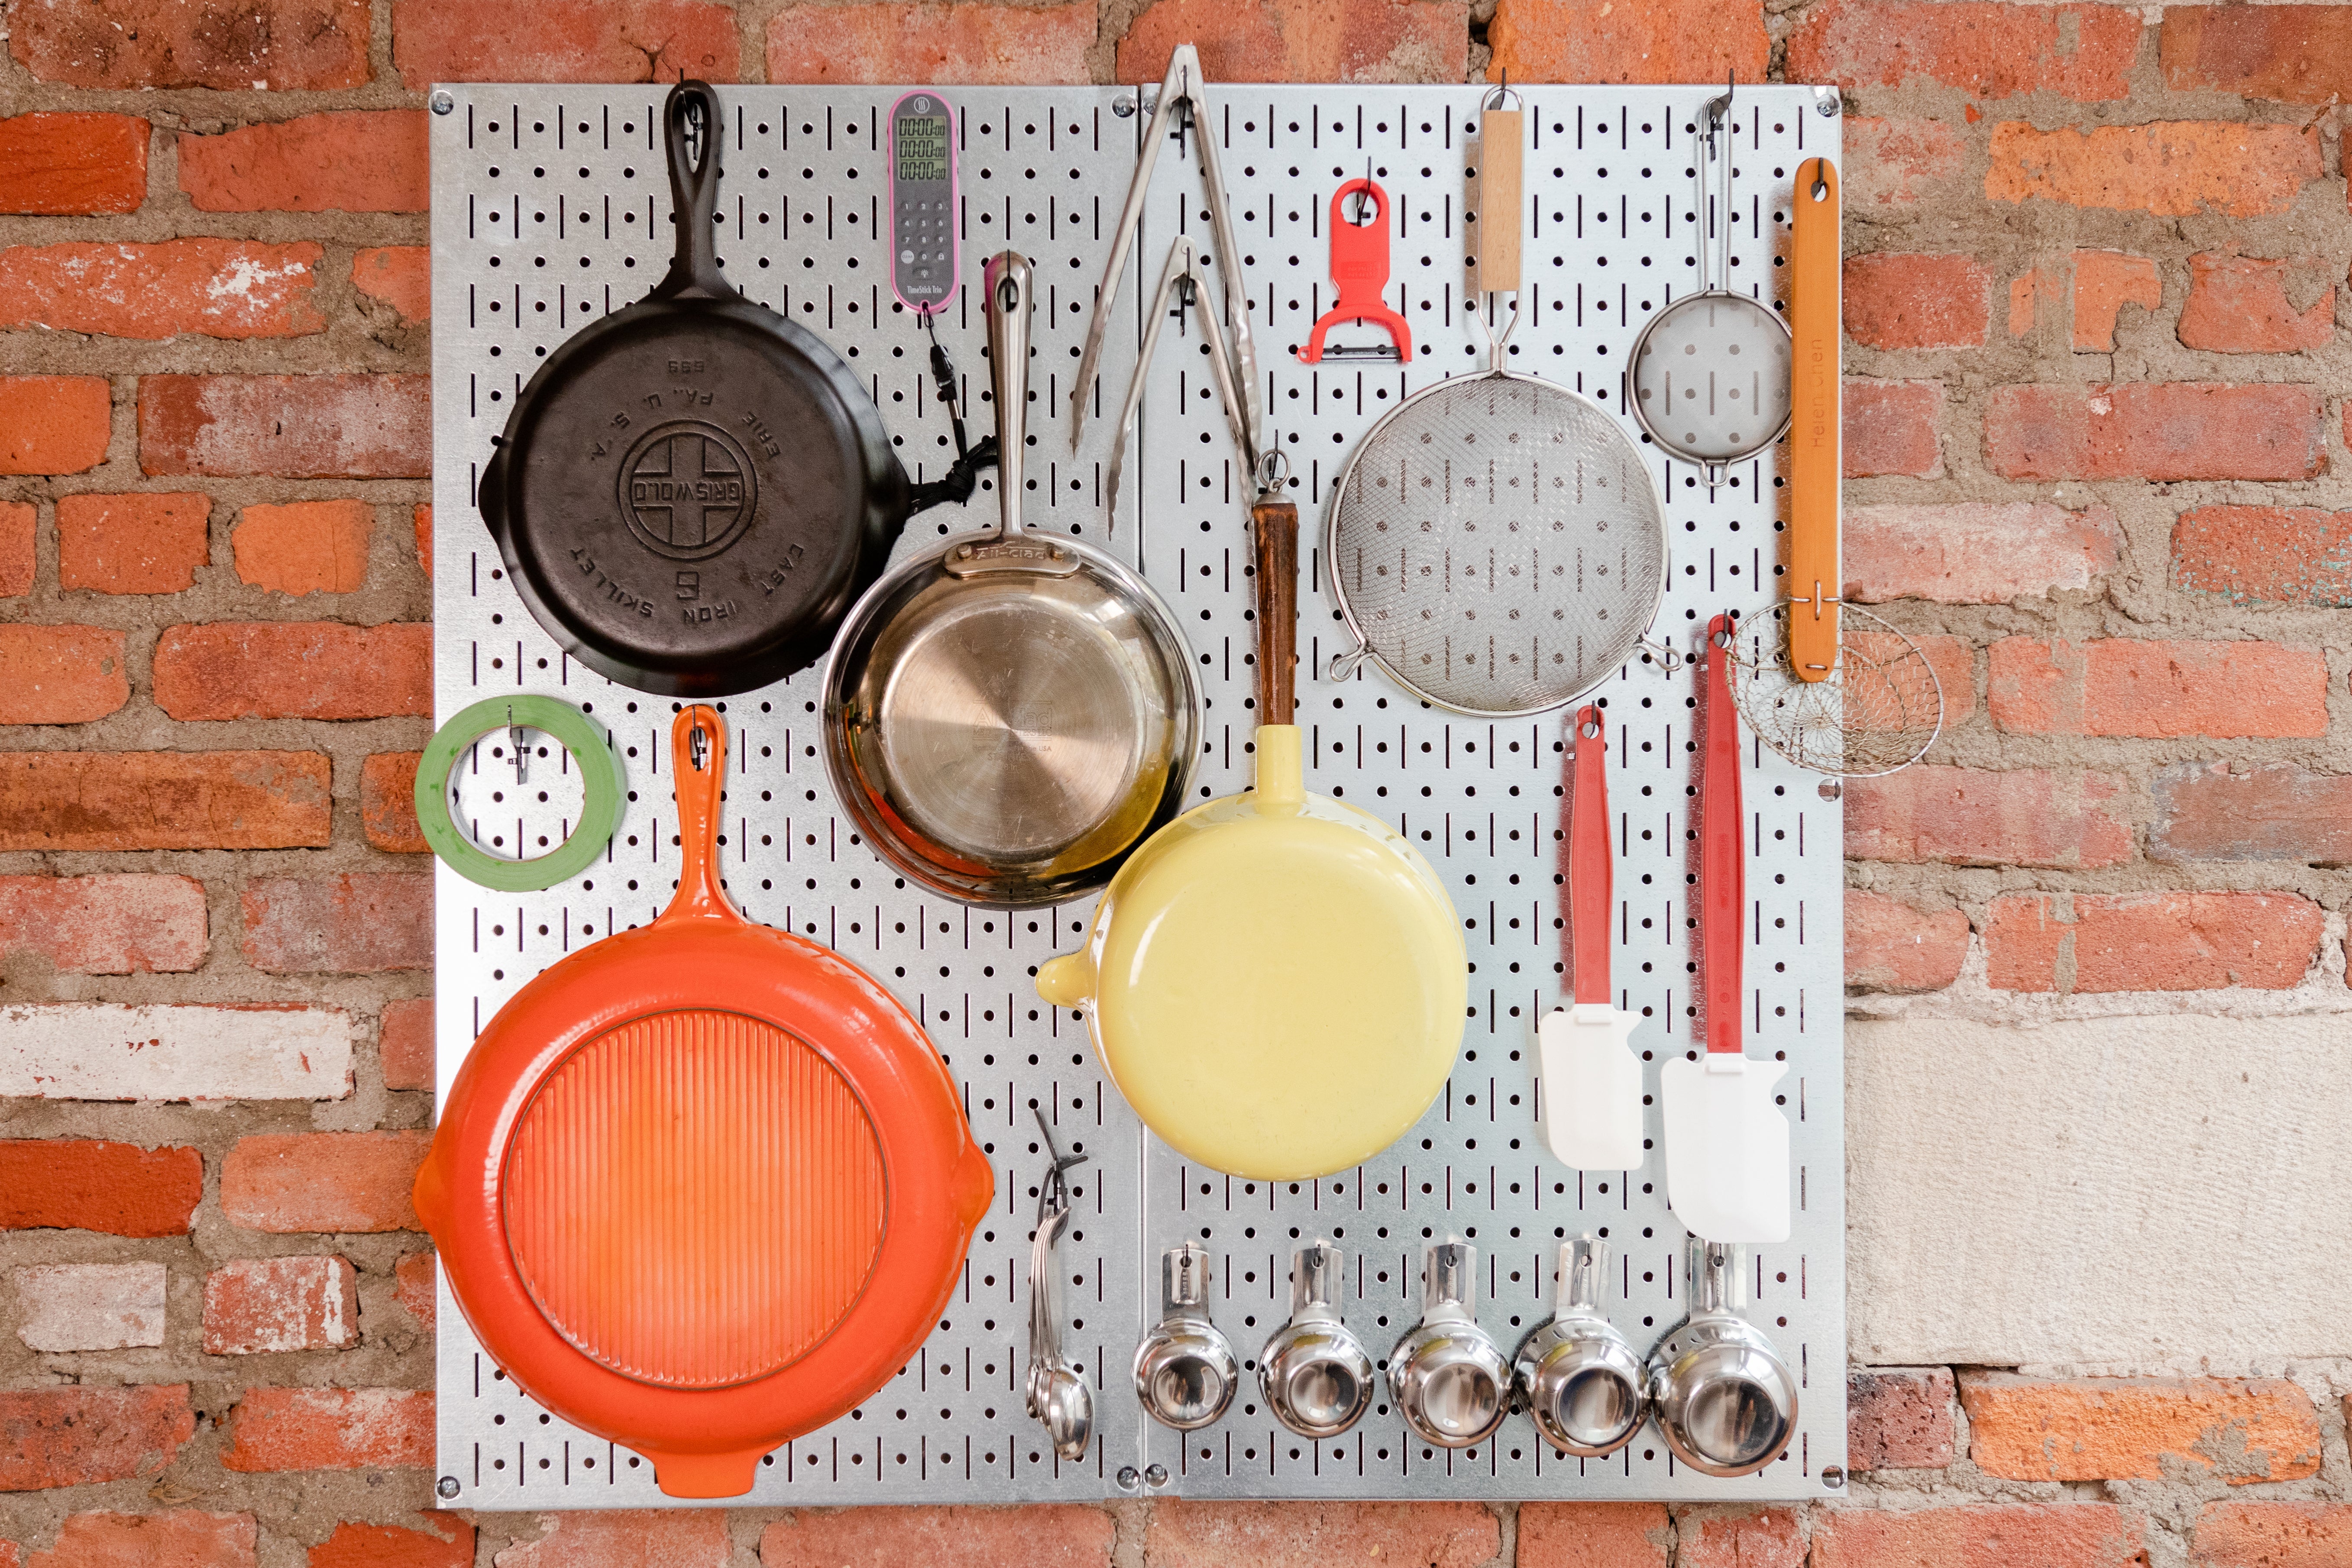 Cookware on a metal pegboard.